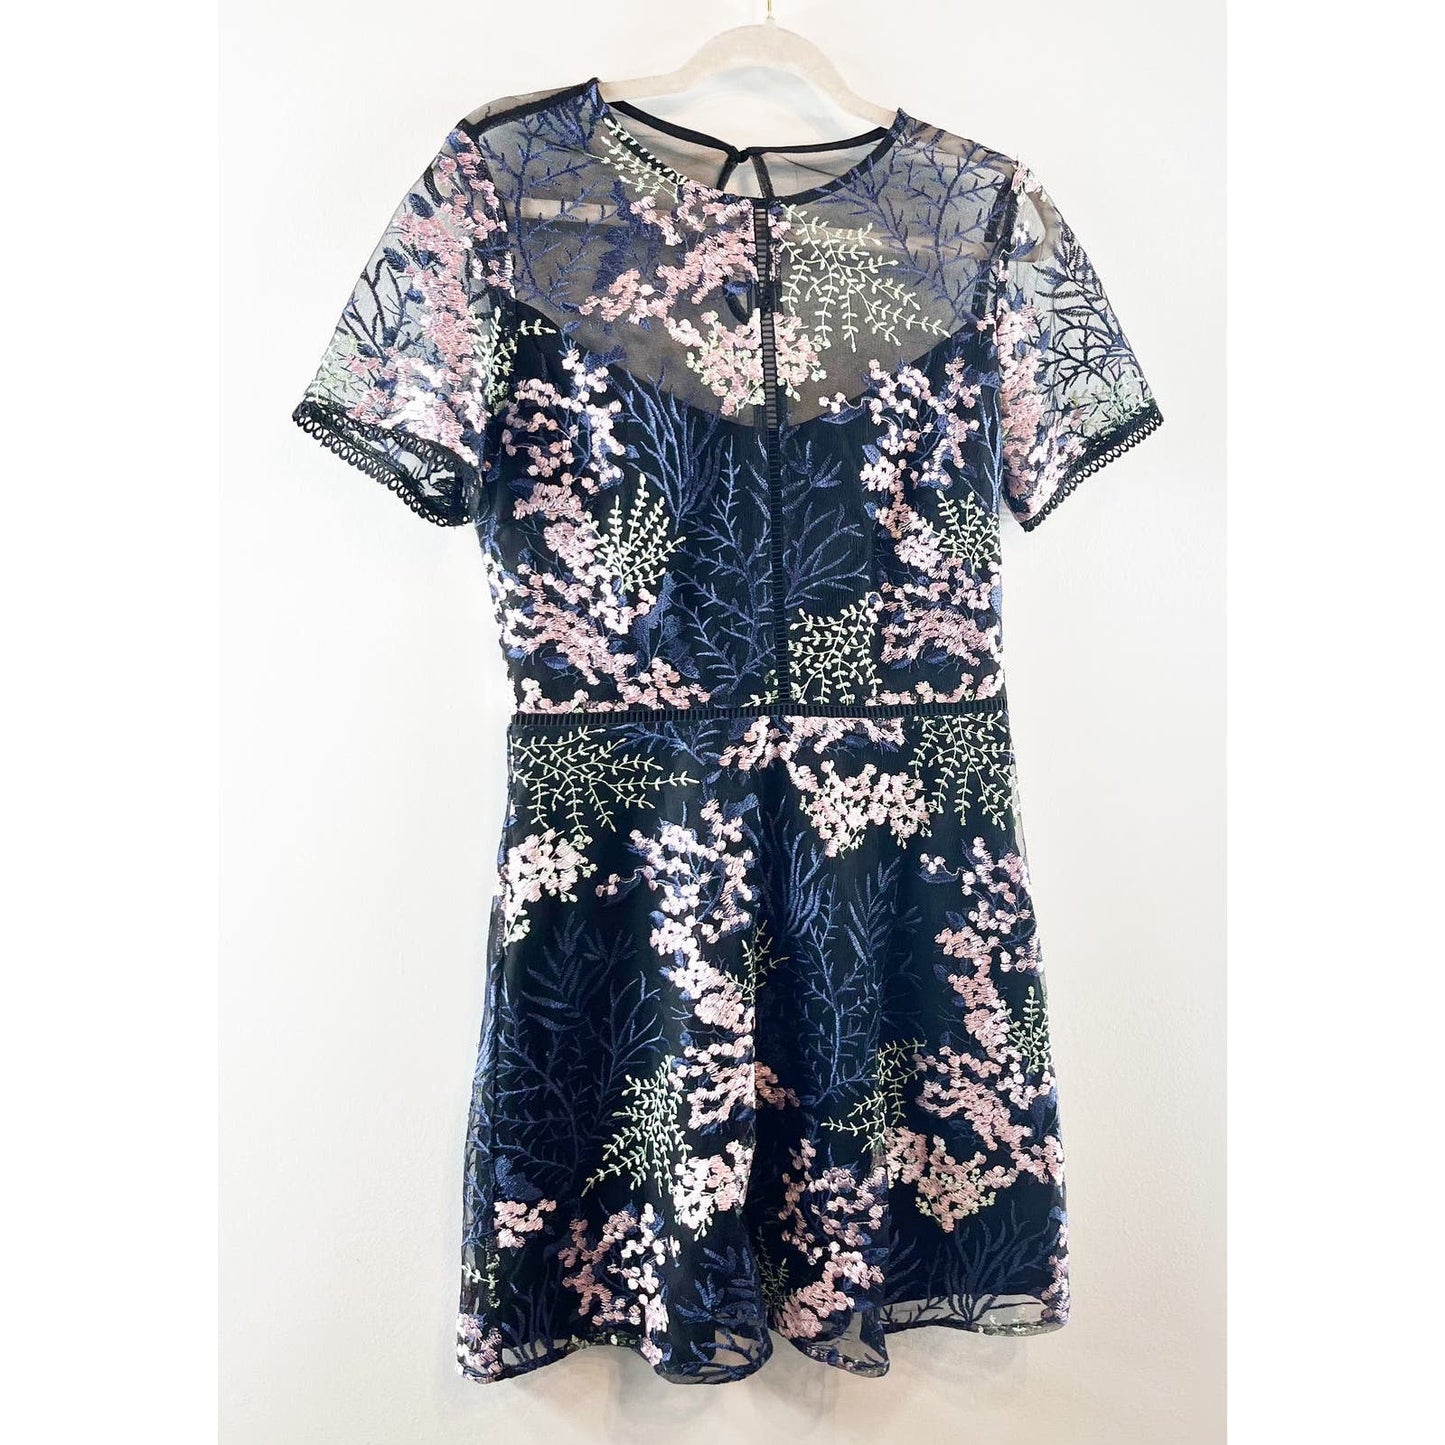 Chelsea28 Floral Embroidered Short Sleeve Lace A-Line Mini Dress Navy Medium